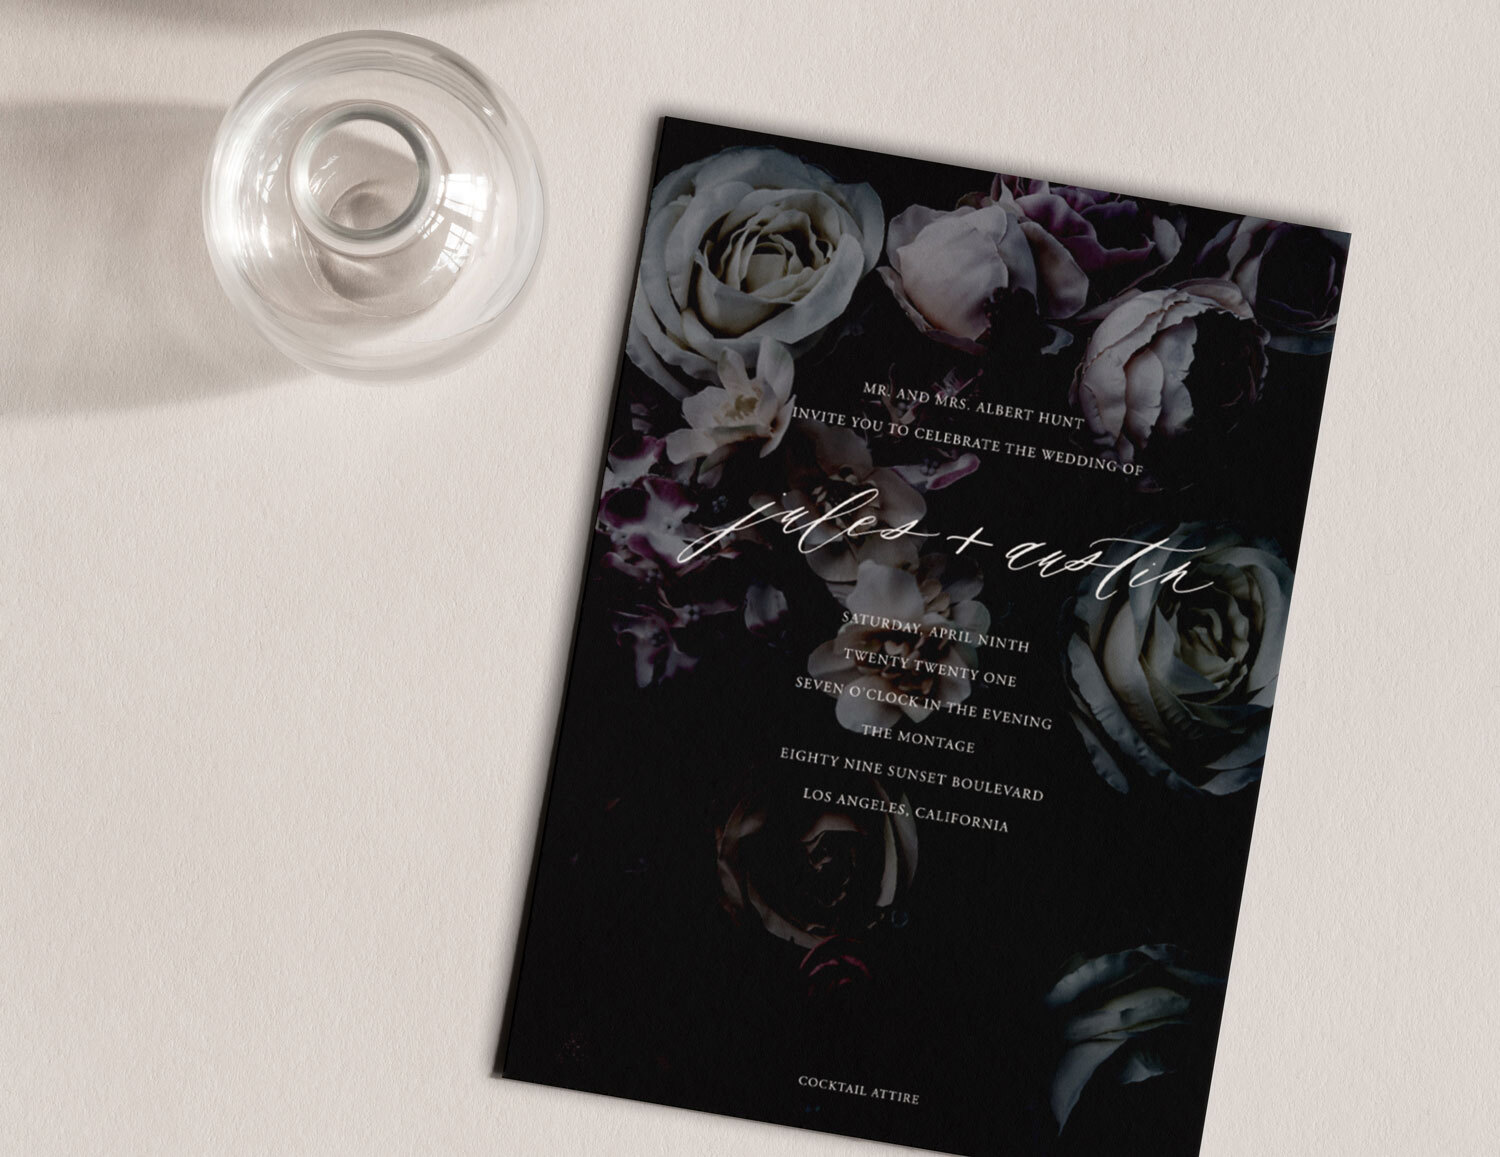 An overhead view of a black and white floral wedding invitation on a tabletop